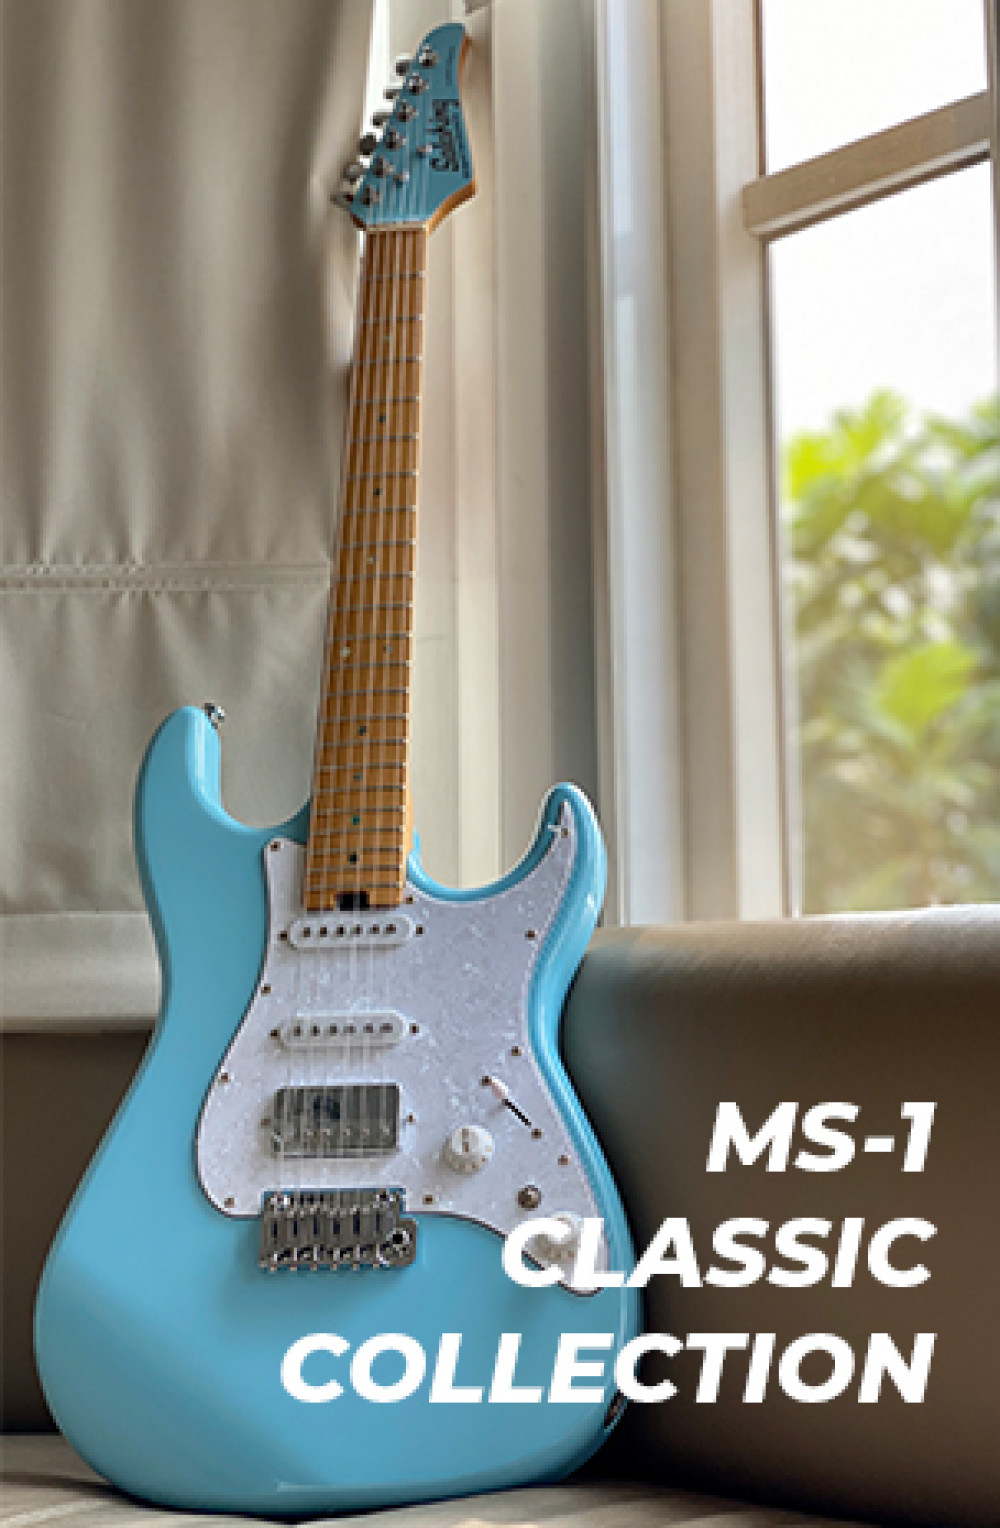 Soloking MS-1 Classic Daphne Blue